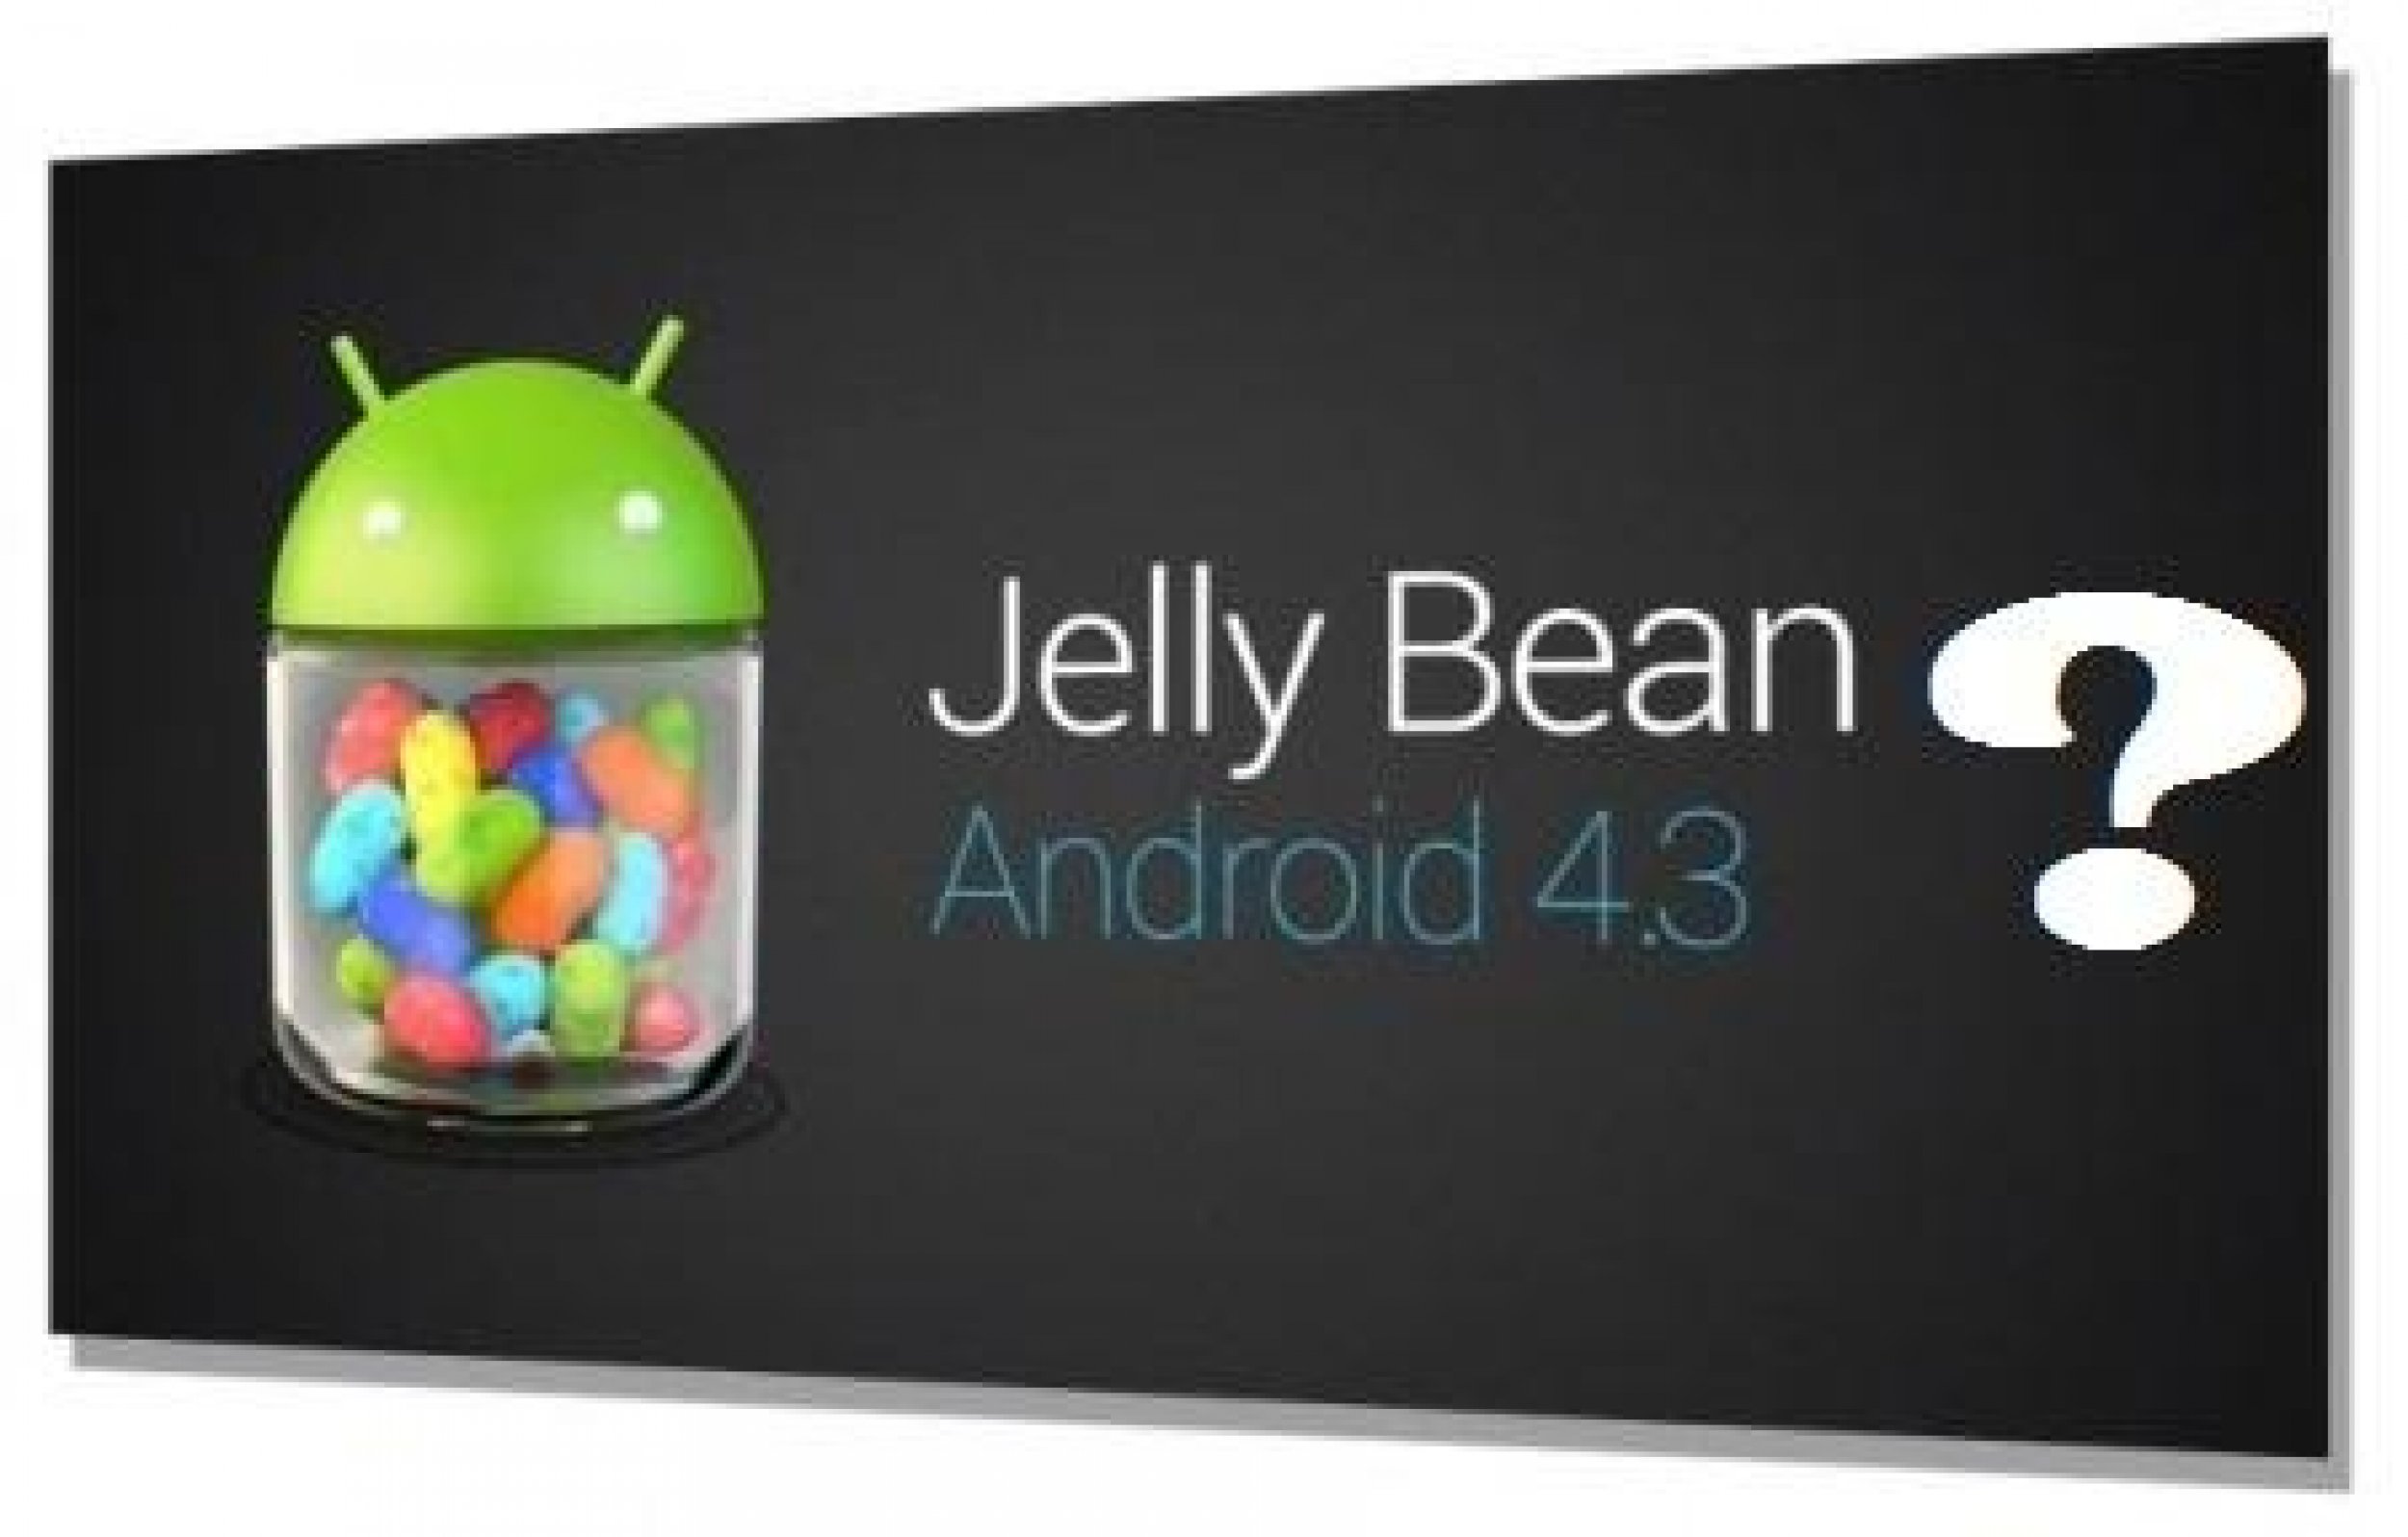 Android 43 Jelly Bean Release Date Nears Os Rollout For Samsung